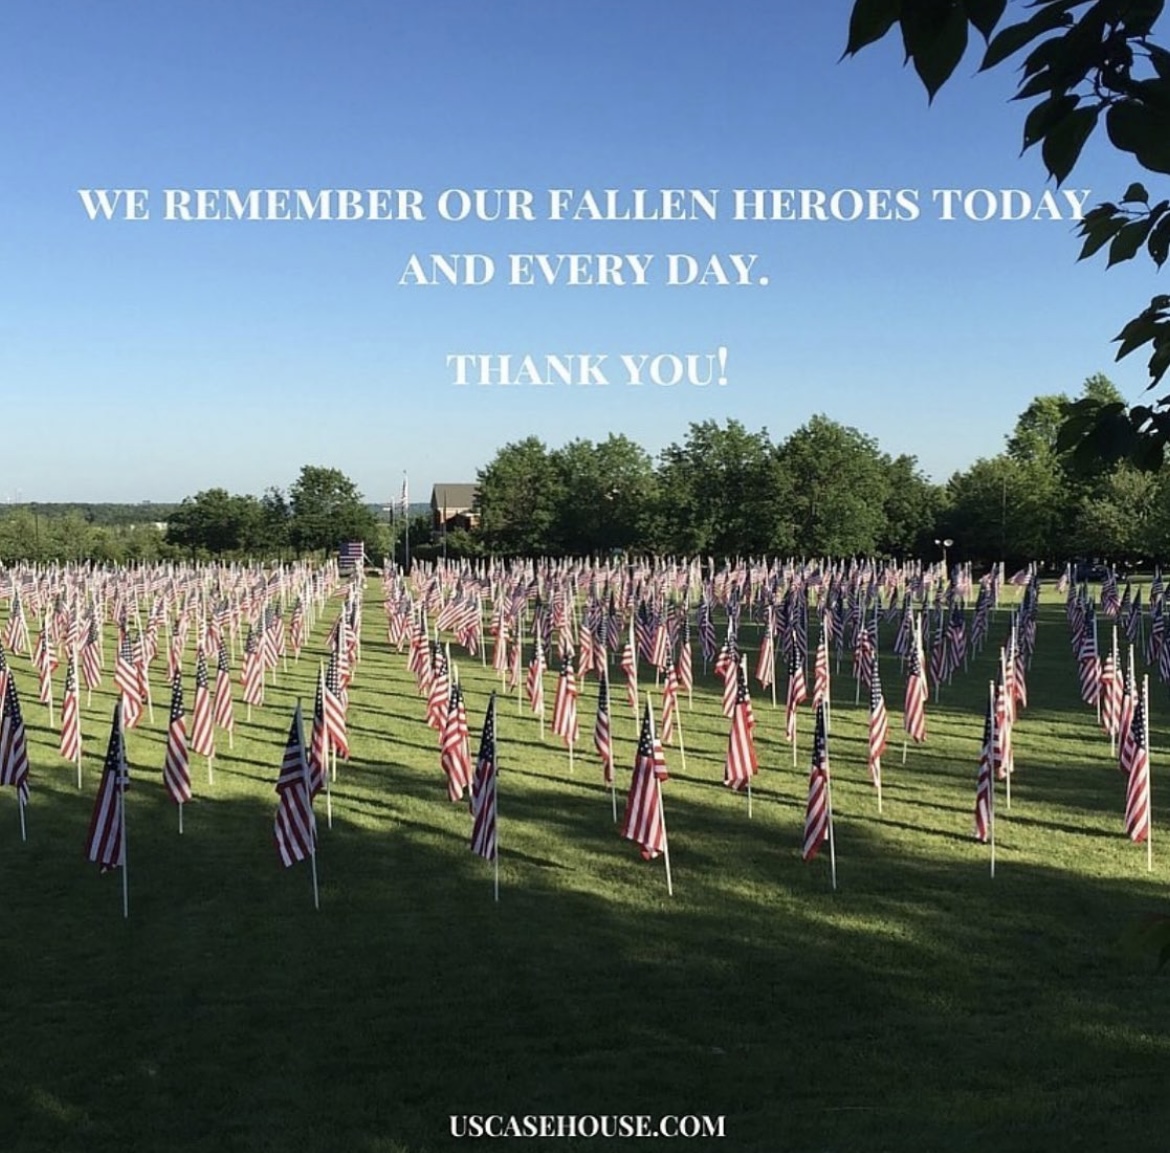 Field of American flags with text in the blue sky reading "We remember our fallen heroes today and every day. Thank you!"